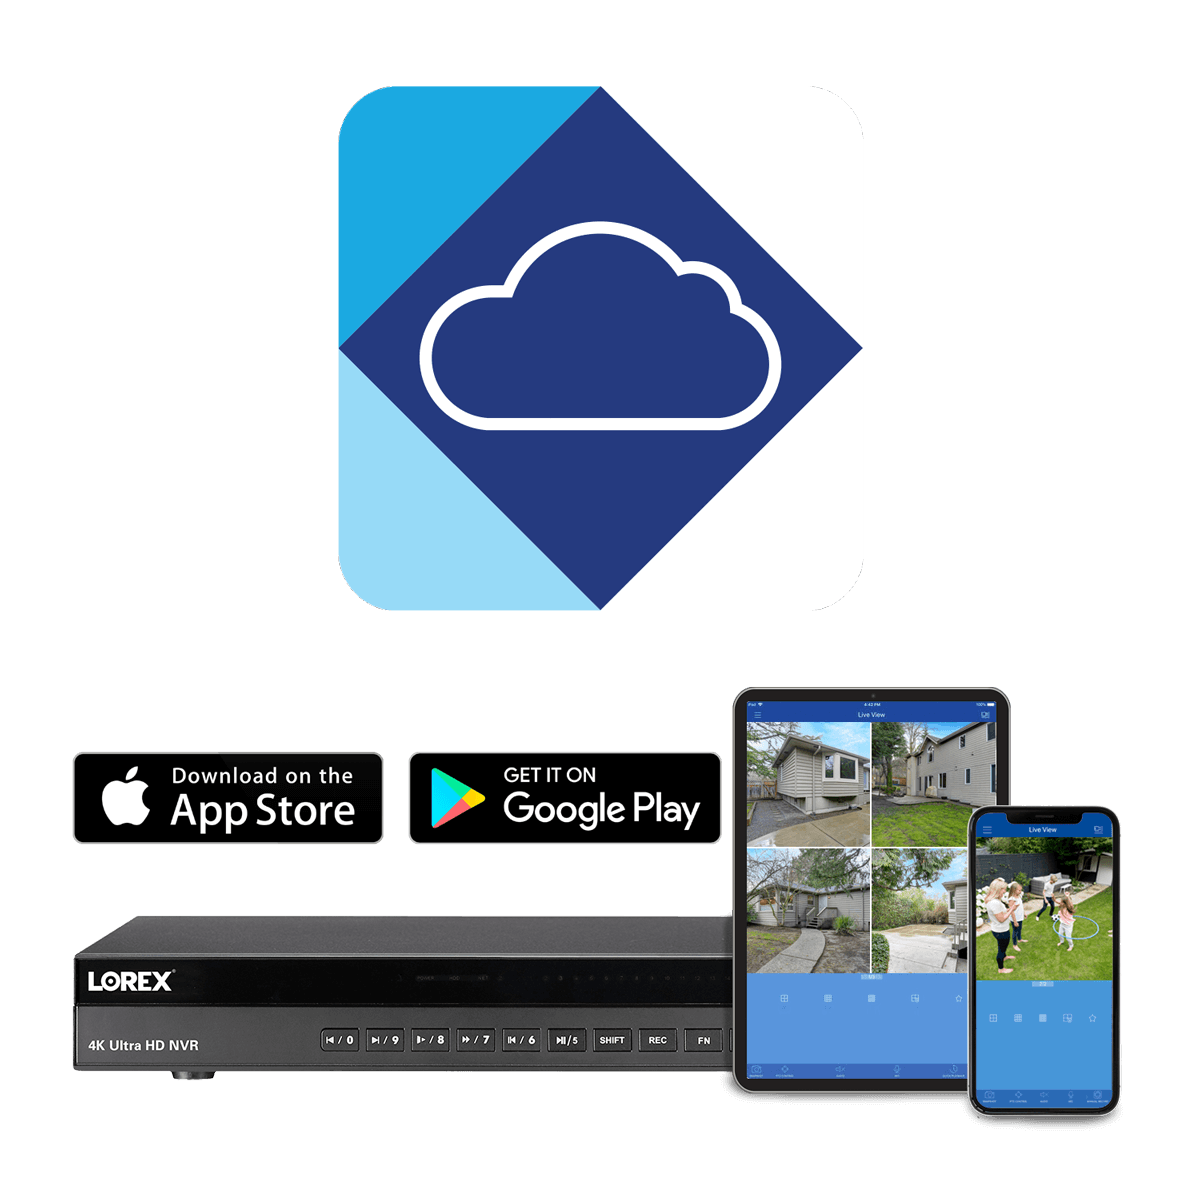 Lorex Cloud app keeps you connected to your security system through your smart phone